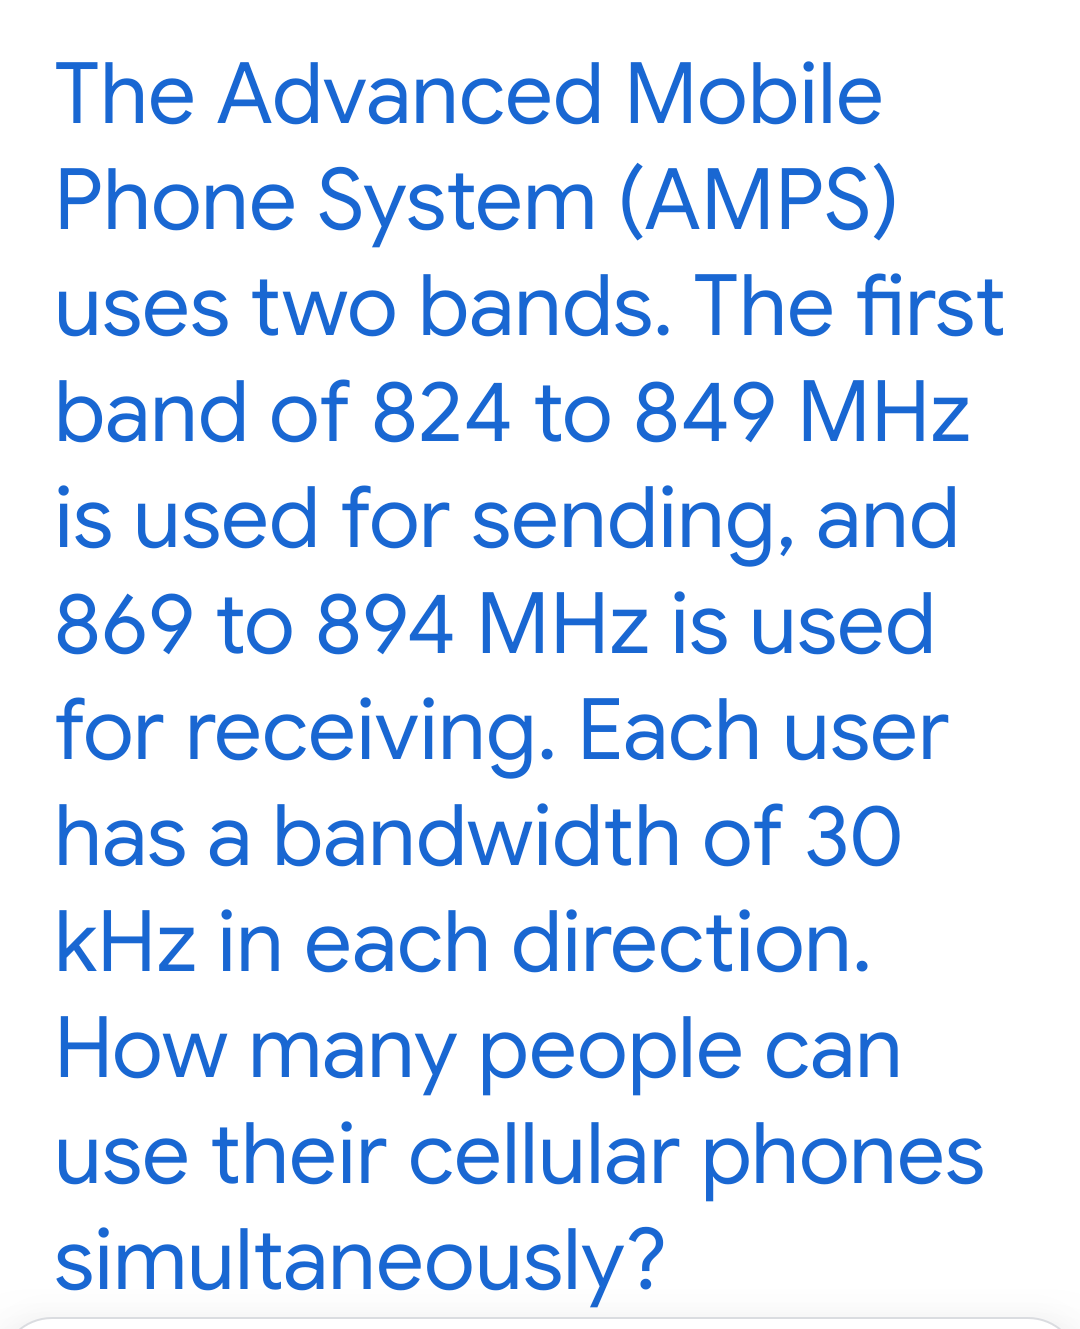 The Advanced Mobile
Phone System (AMPS)
uses two bands. The first
band of 824 to 849 MHz
is used for sending, and
869 to 894 MHz is used
for receiving. Each user
has a bandwidth of 30
kHz in each direction.
How many people can
use their cellular phones
simultaneously?
